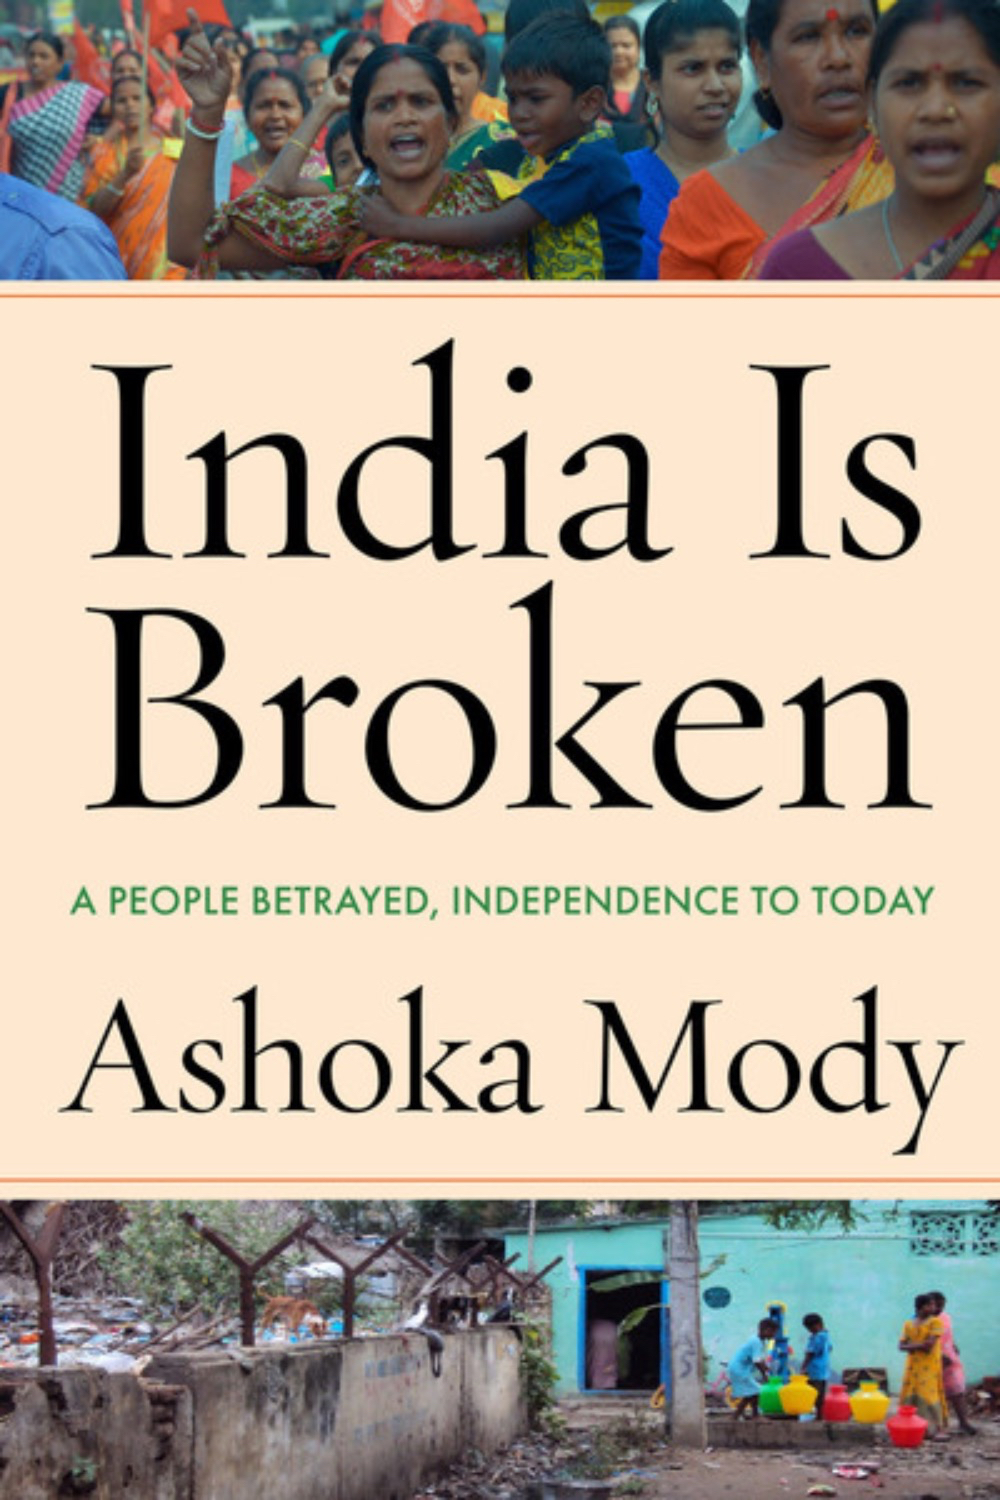 India is Broken: A People Betrayed, Independence Today by Ashoka Mody